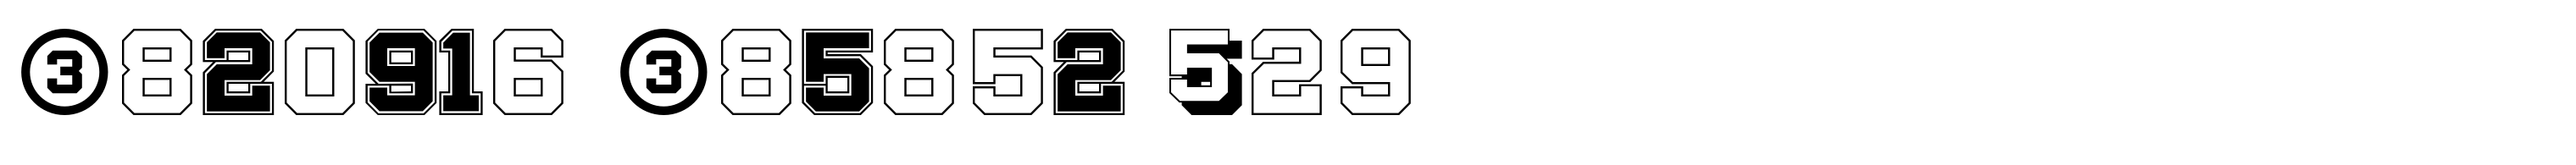 Display Digits Two